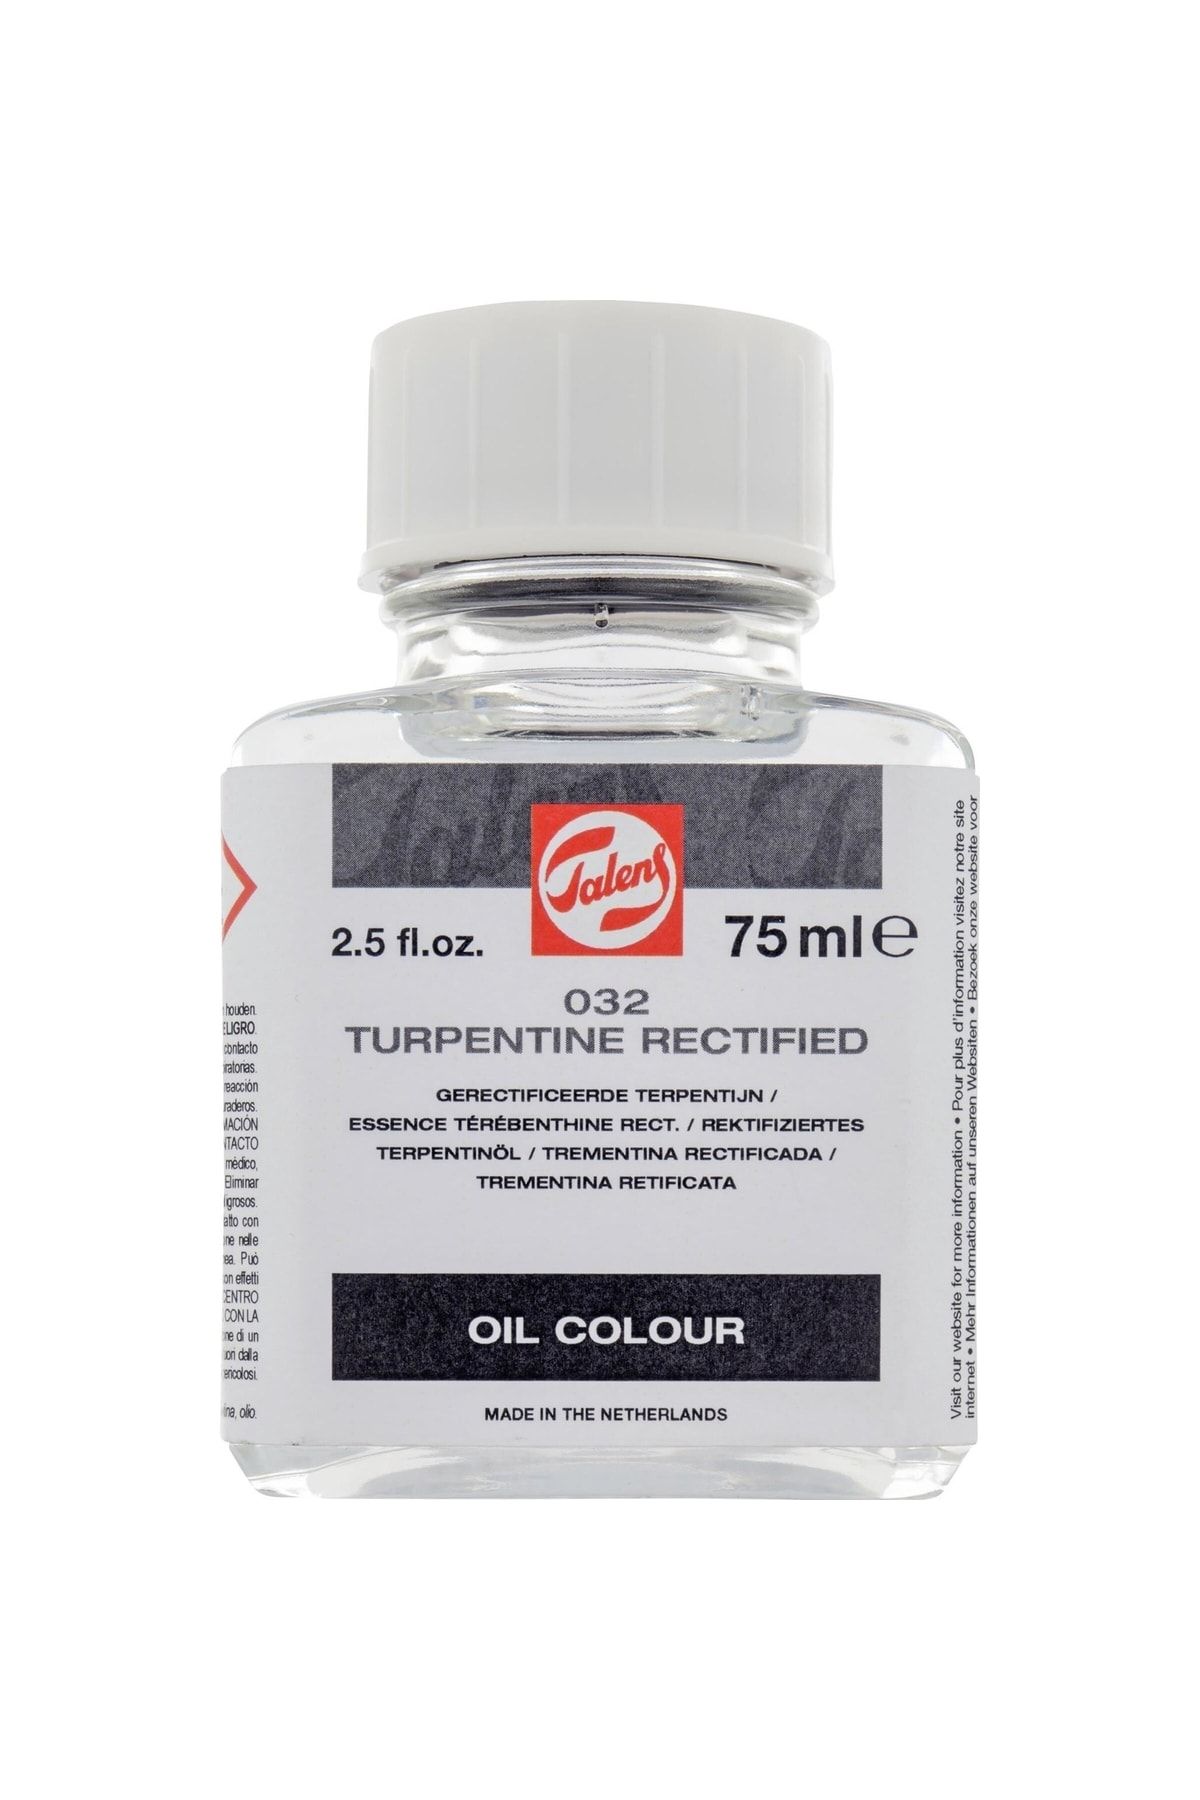 Talens Rectified Turpentine 032 75ml